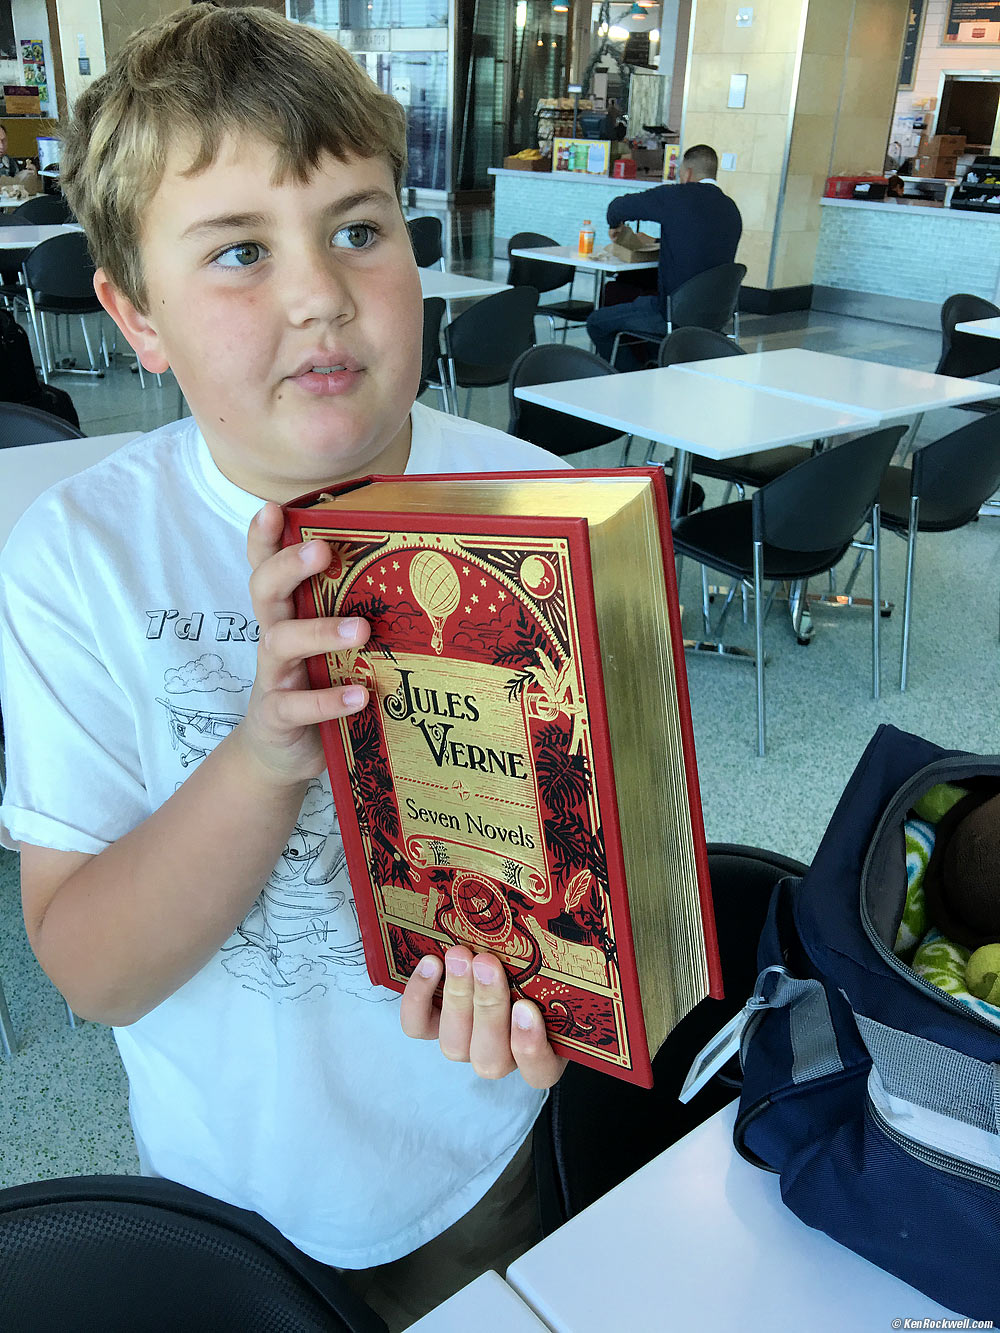 Ryan brings some light reading, Seven Novels by Jules Verne, for the plane